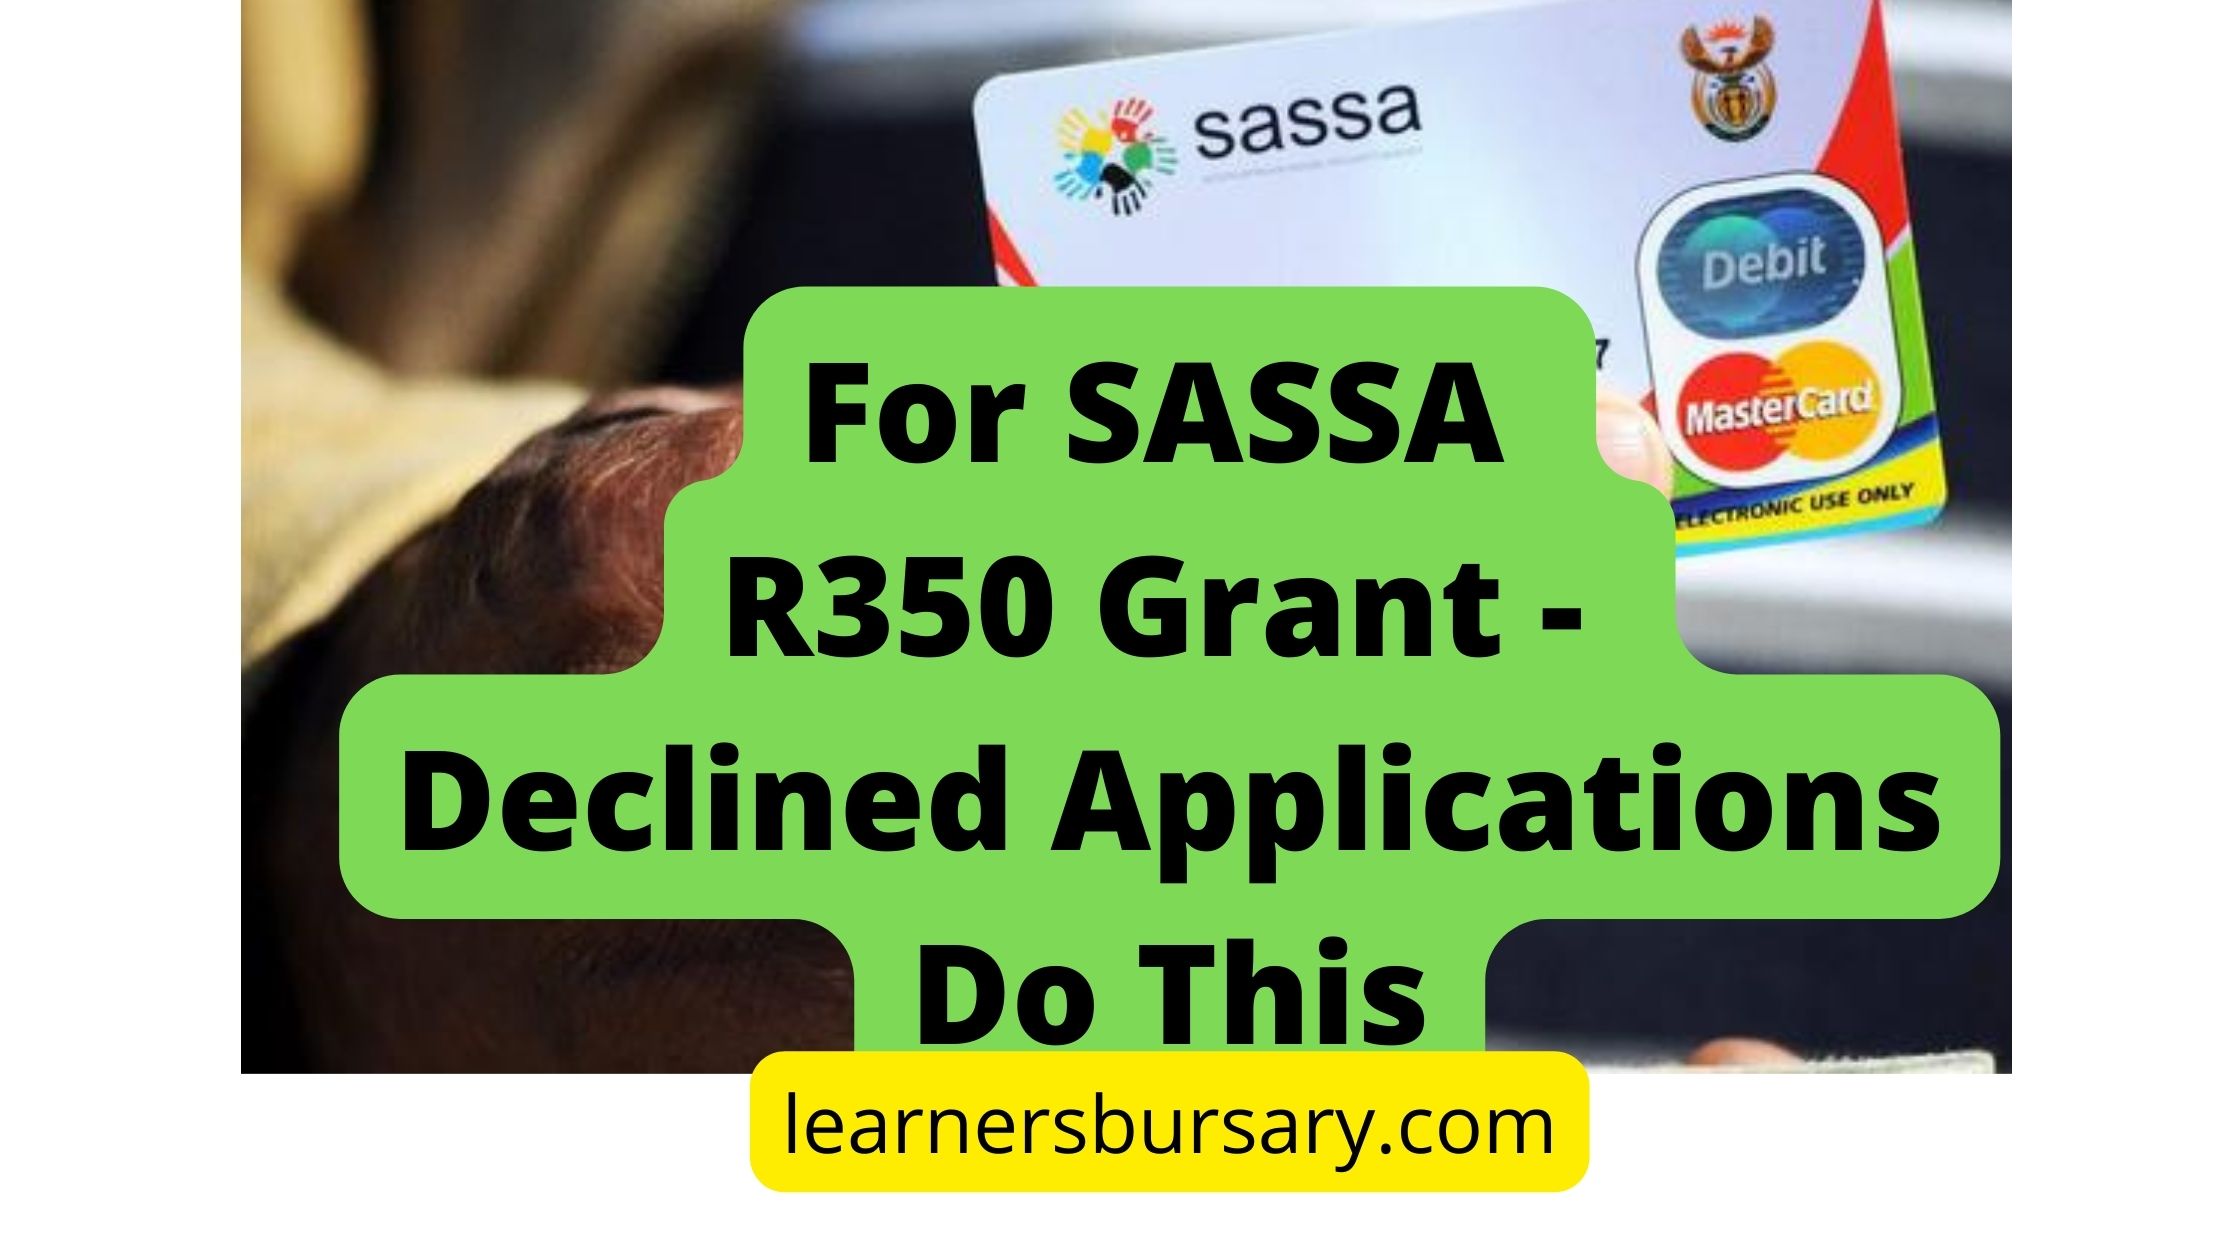 For SASSA R350 Grant - Declined Applications Do This